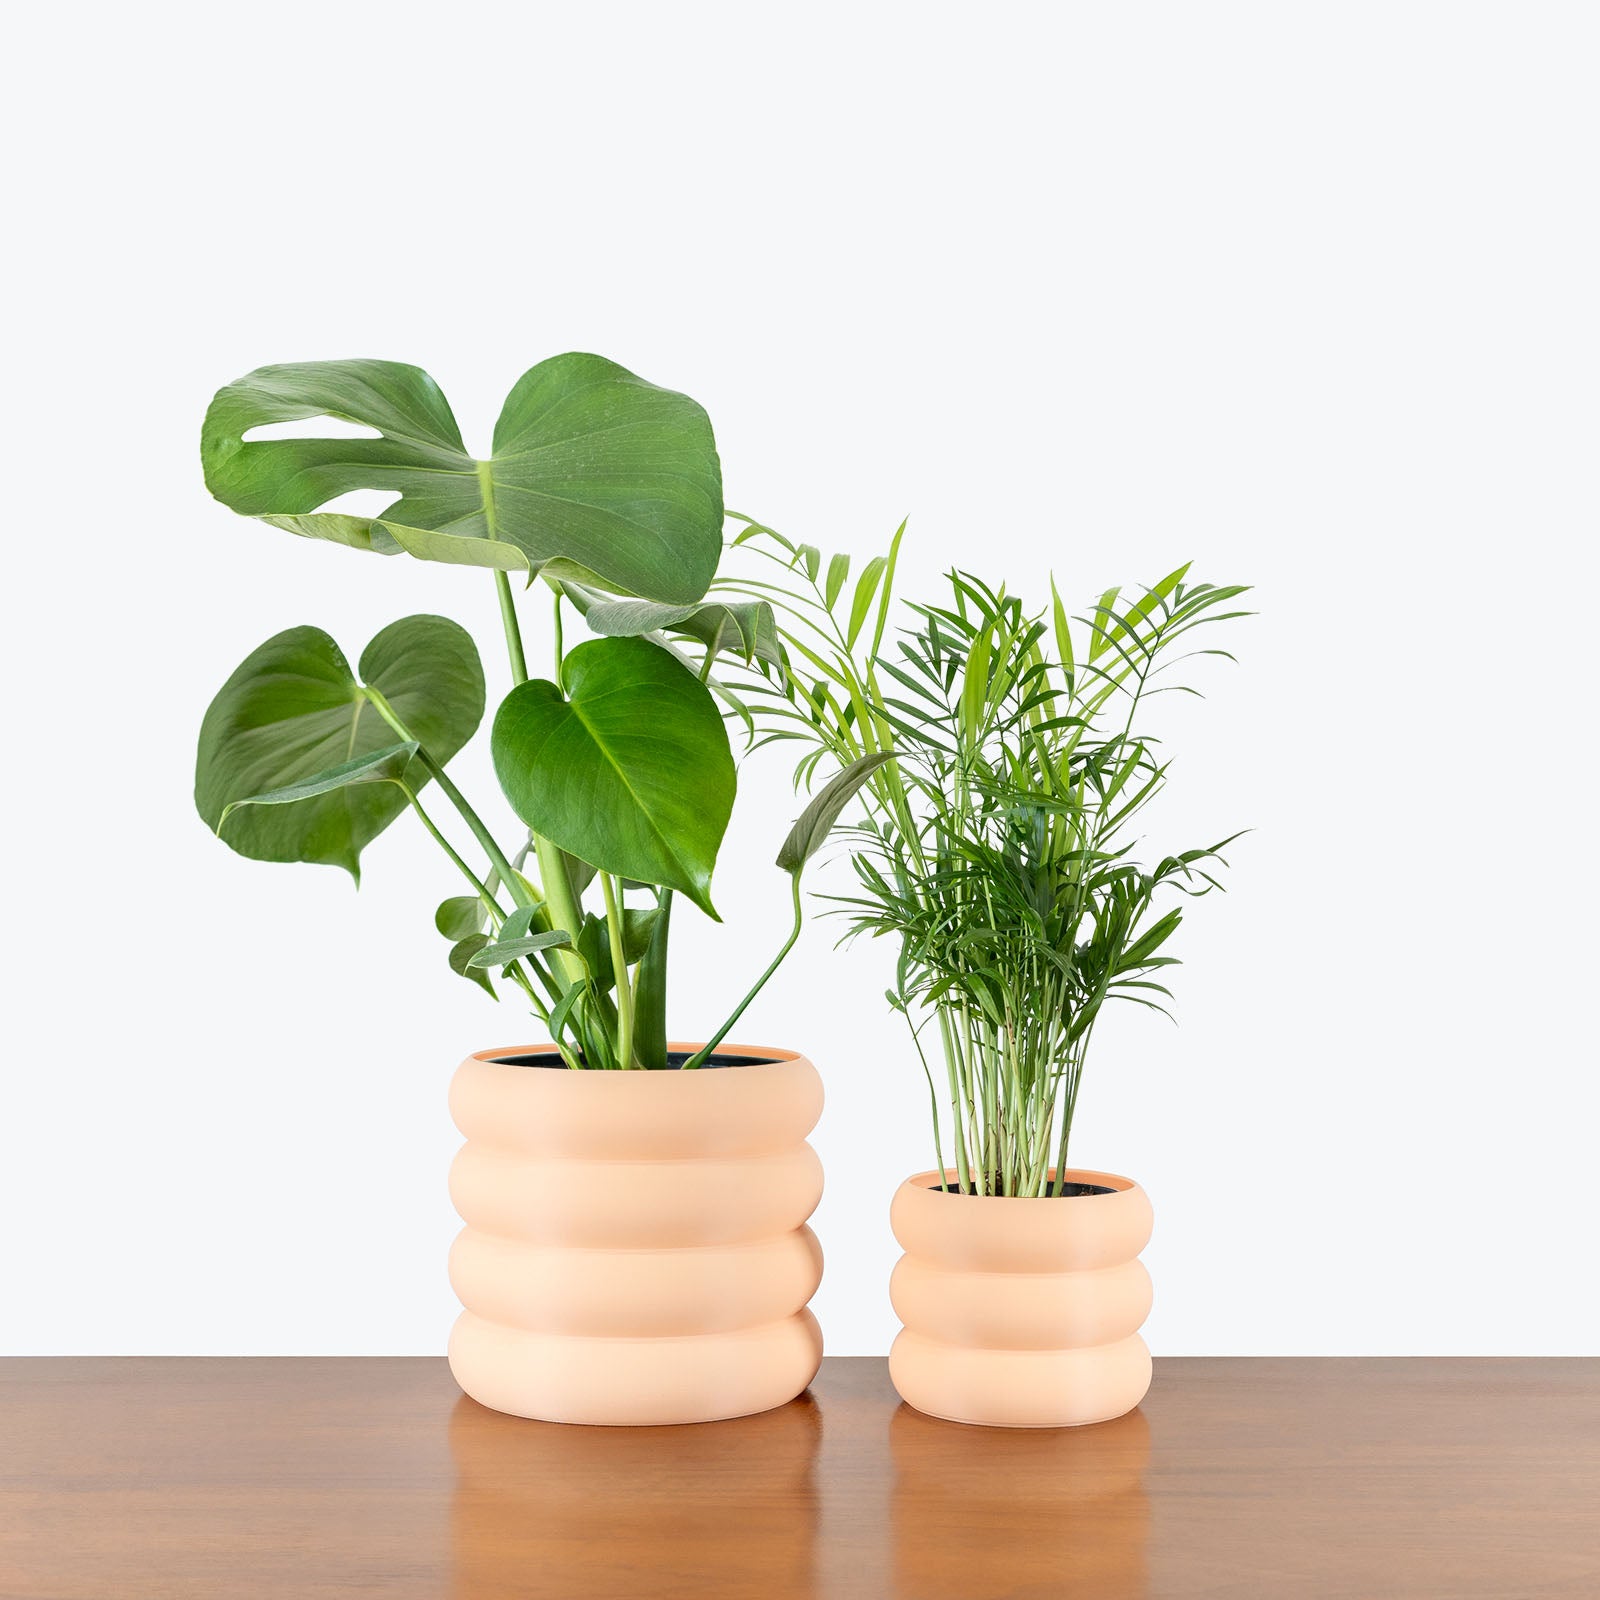 Best Selling Duo in 3D Printed Eco Friendly Donut Peach Planter - House Plants Delivery Toronto - JOMO Studio #planter_donut planter